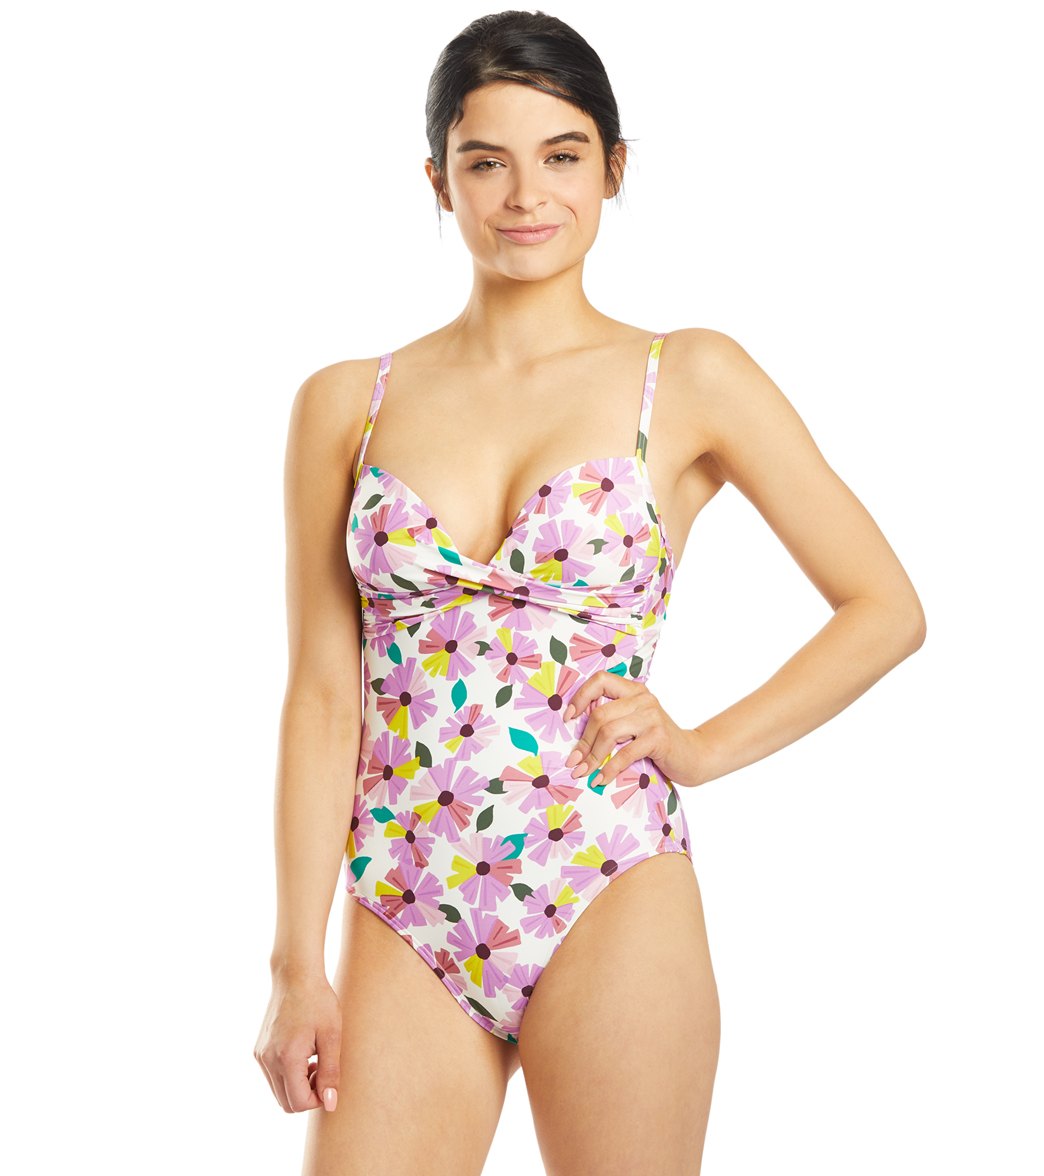 Kate Spade New York Wallflower Draped One Piece Swimsuit - White Large - Swimoutlet.com